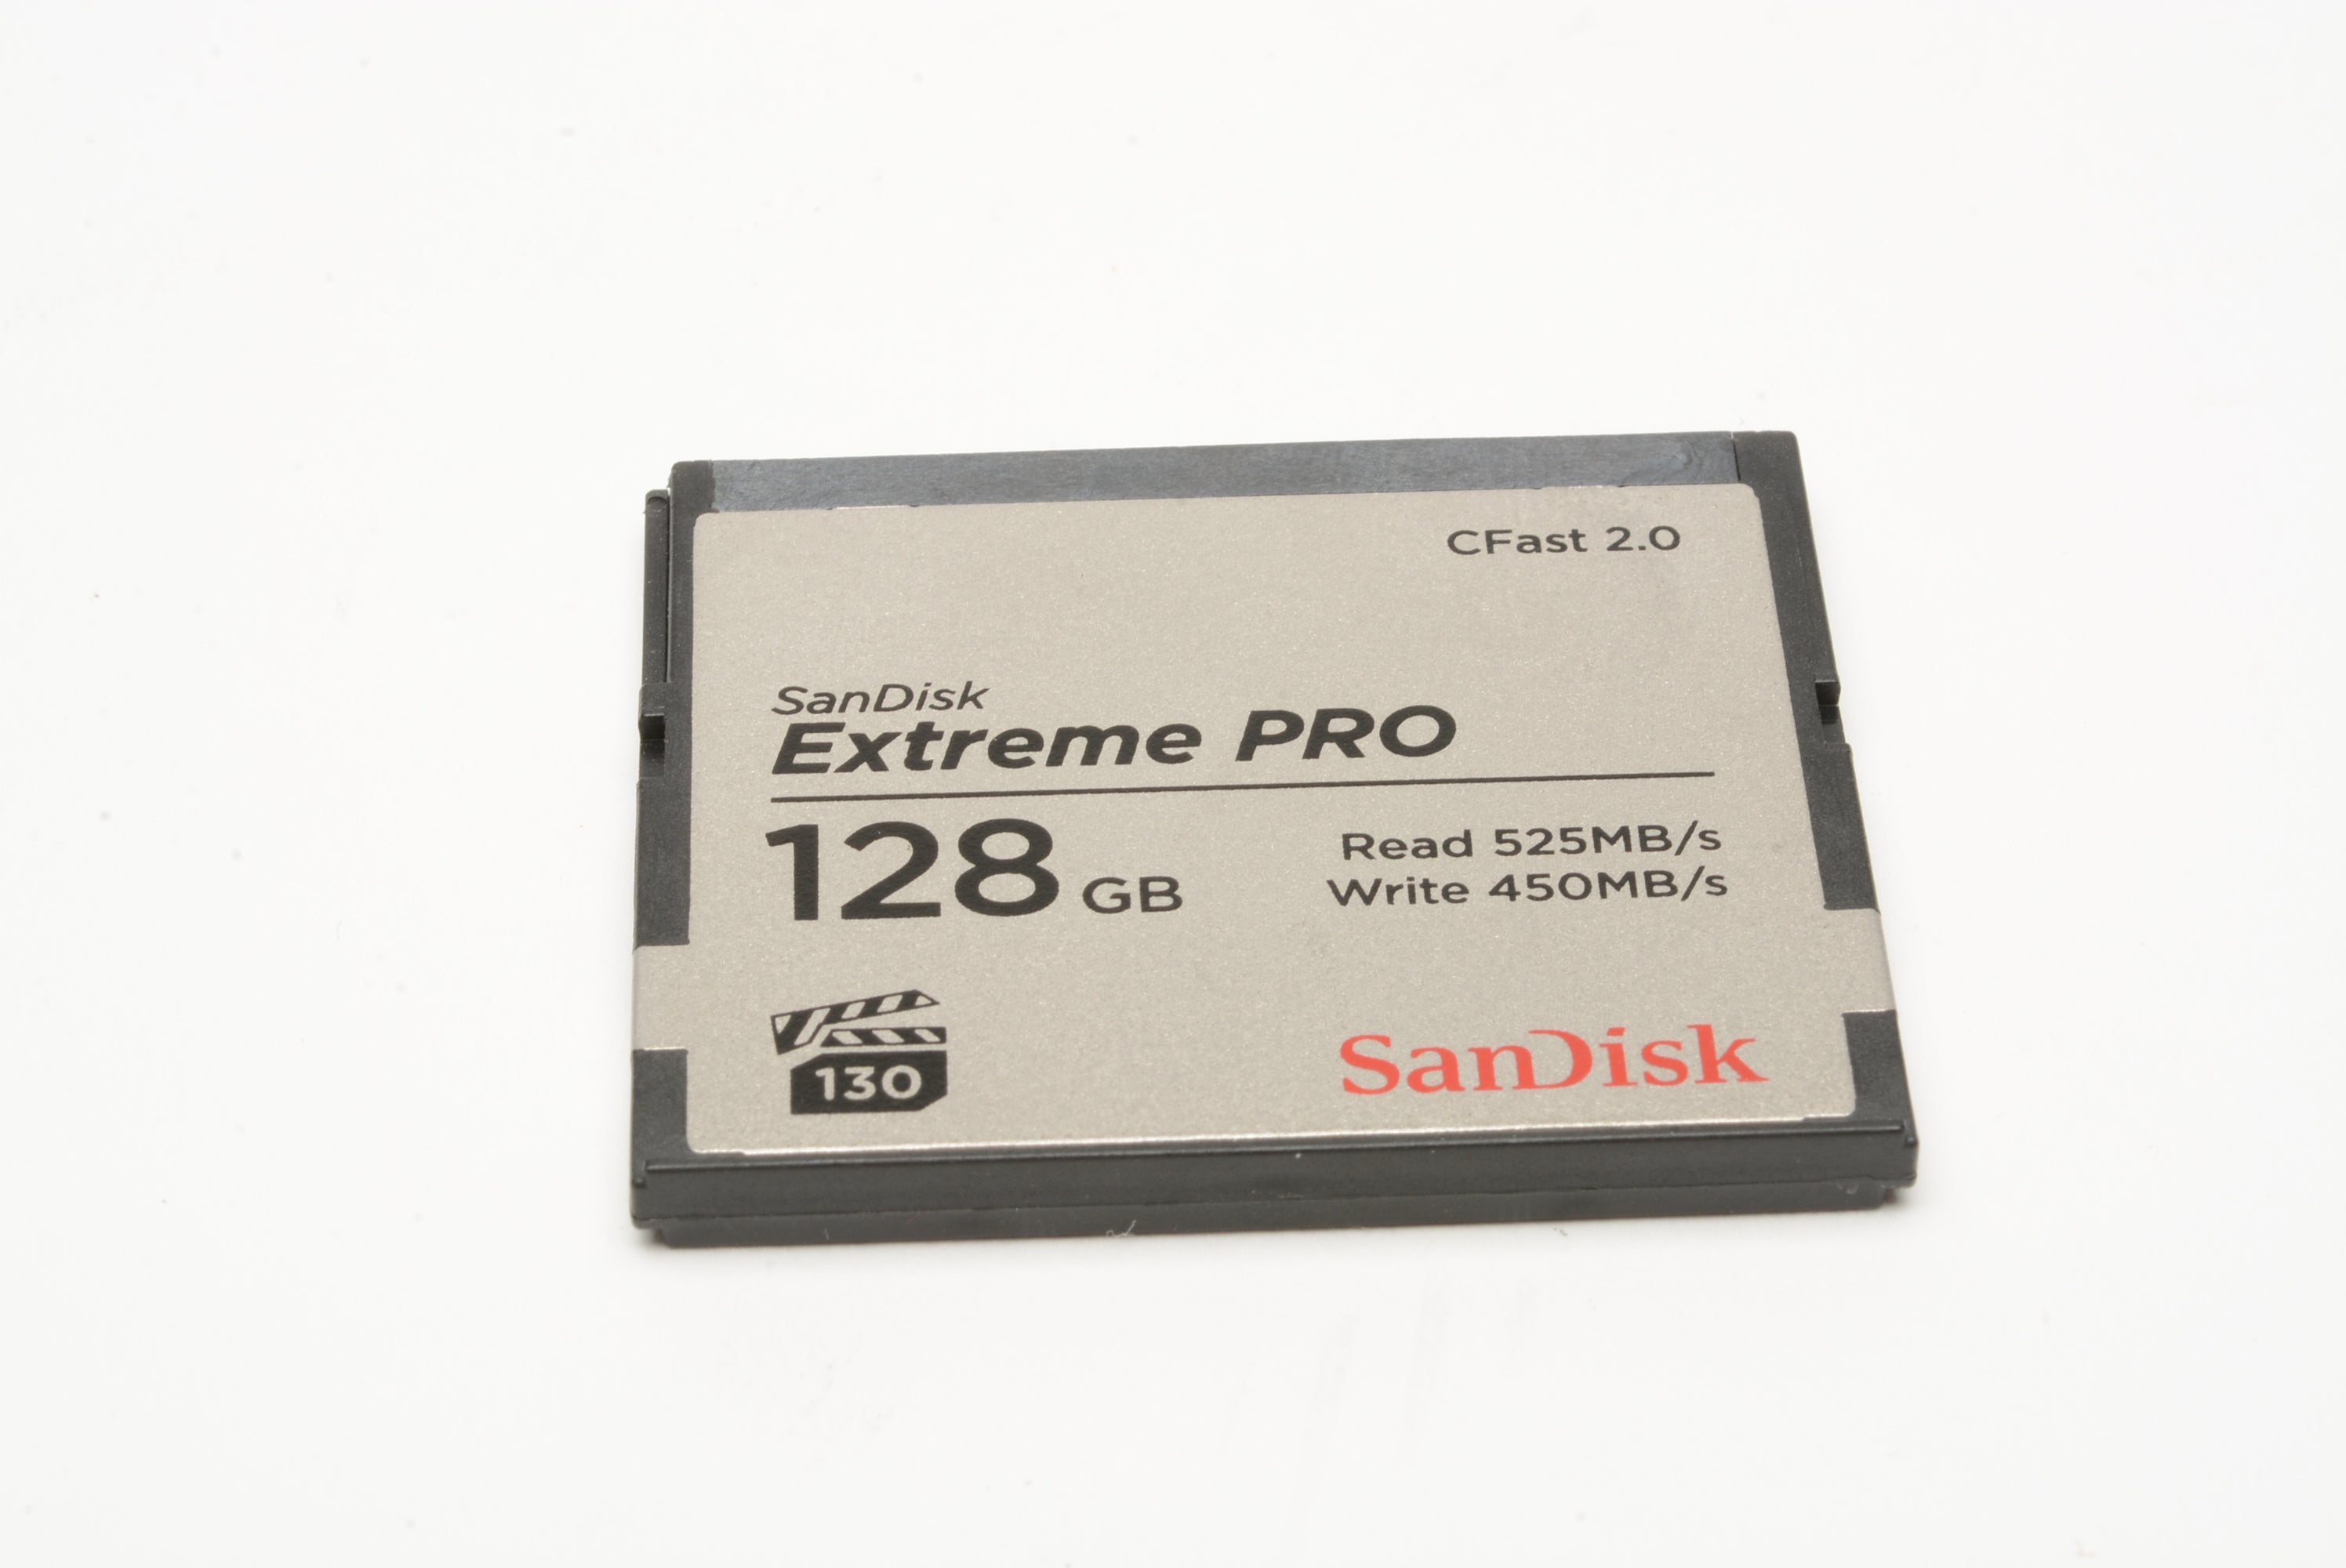 SanDisk Extreme PRO 128 GB CFast 2.0 Memory Card, Barely used